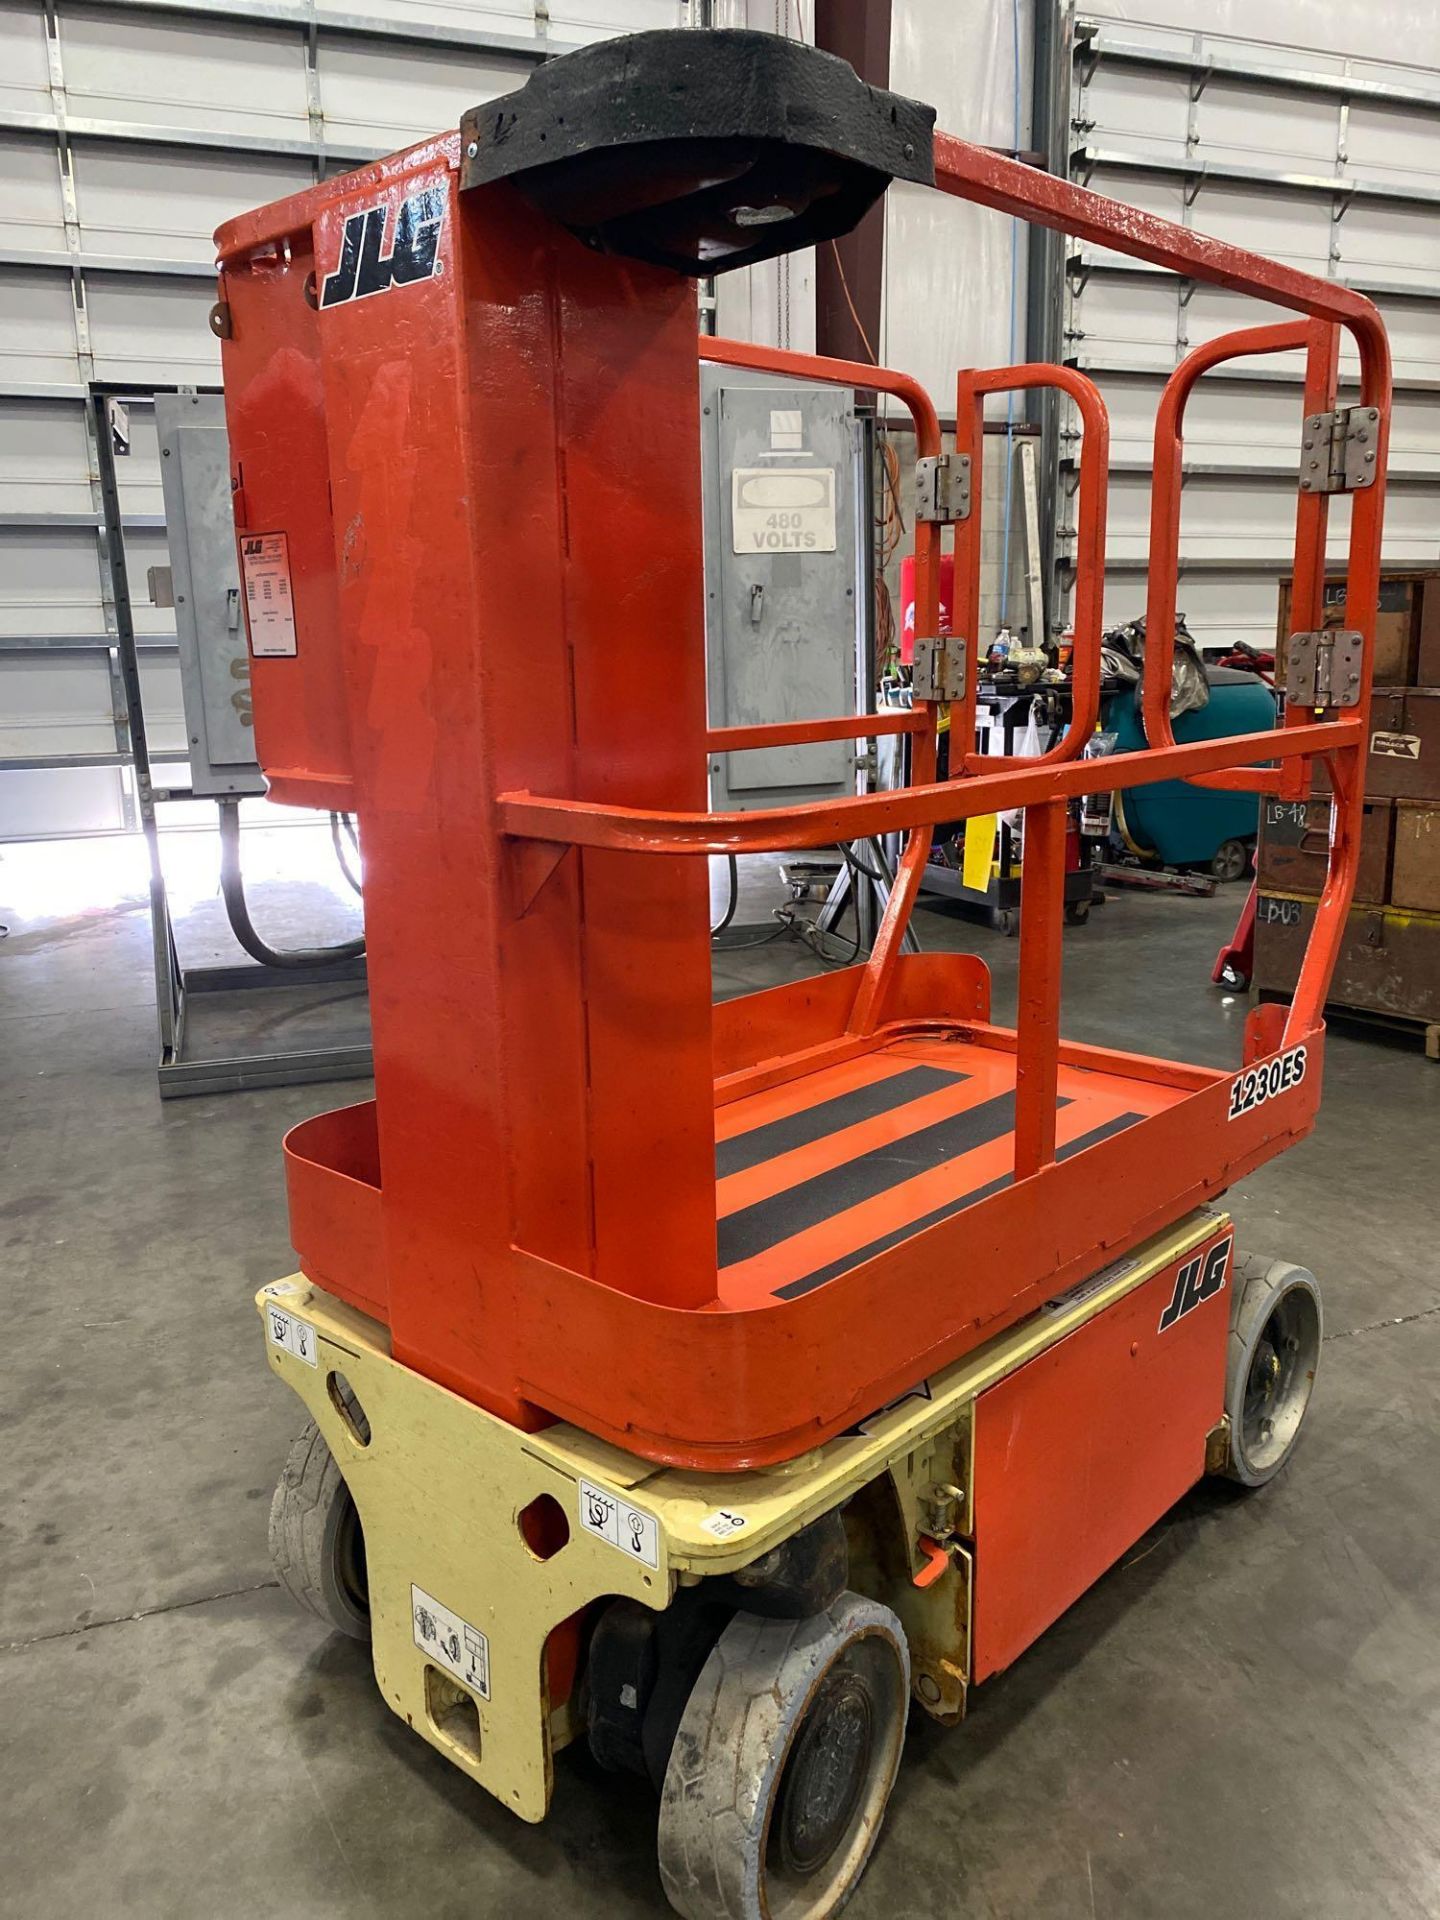 JLG 1230ES MAN LIFT, 12’ PLATFORM HEIGHT, 16’ WORKING HEIGHT, 24V, BUILT IN CHARGER, RUNS AND OPERAT - Image 13 of 14